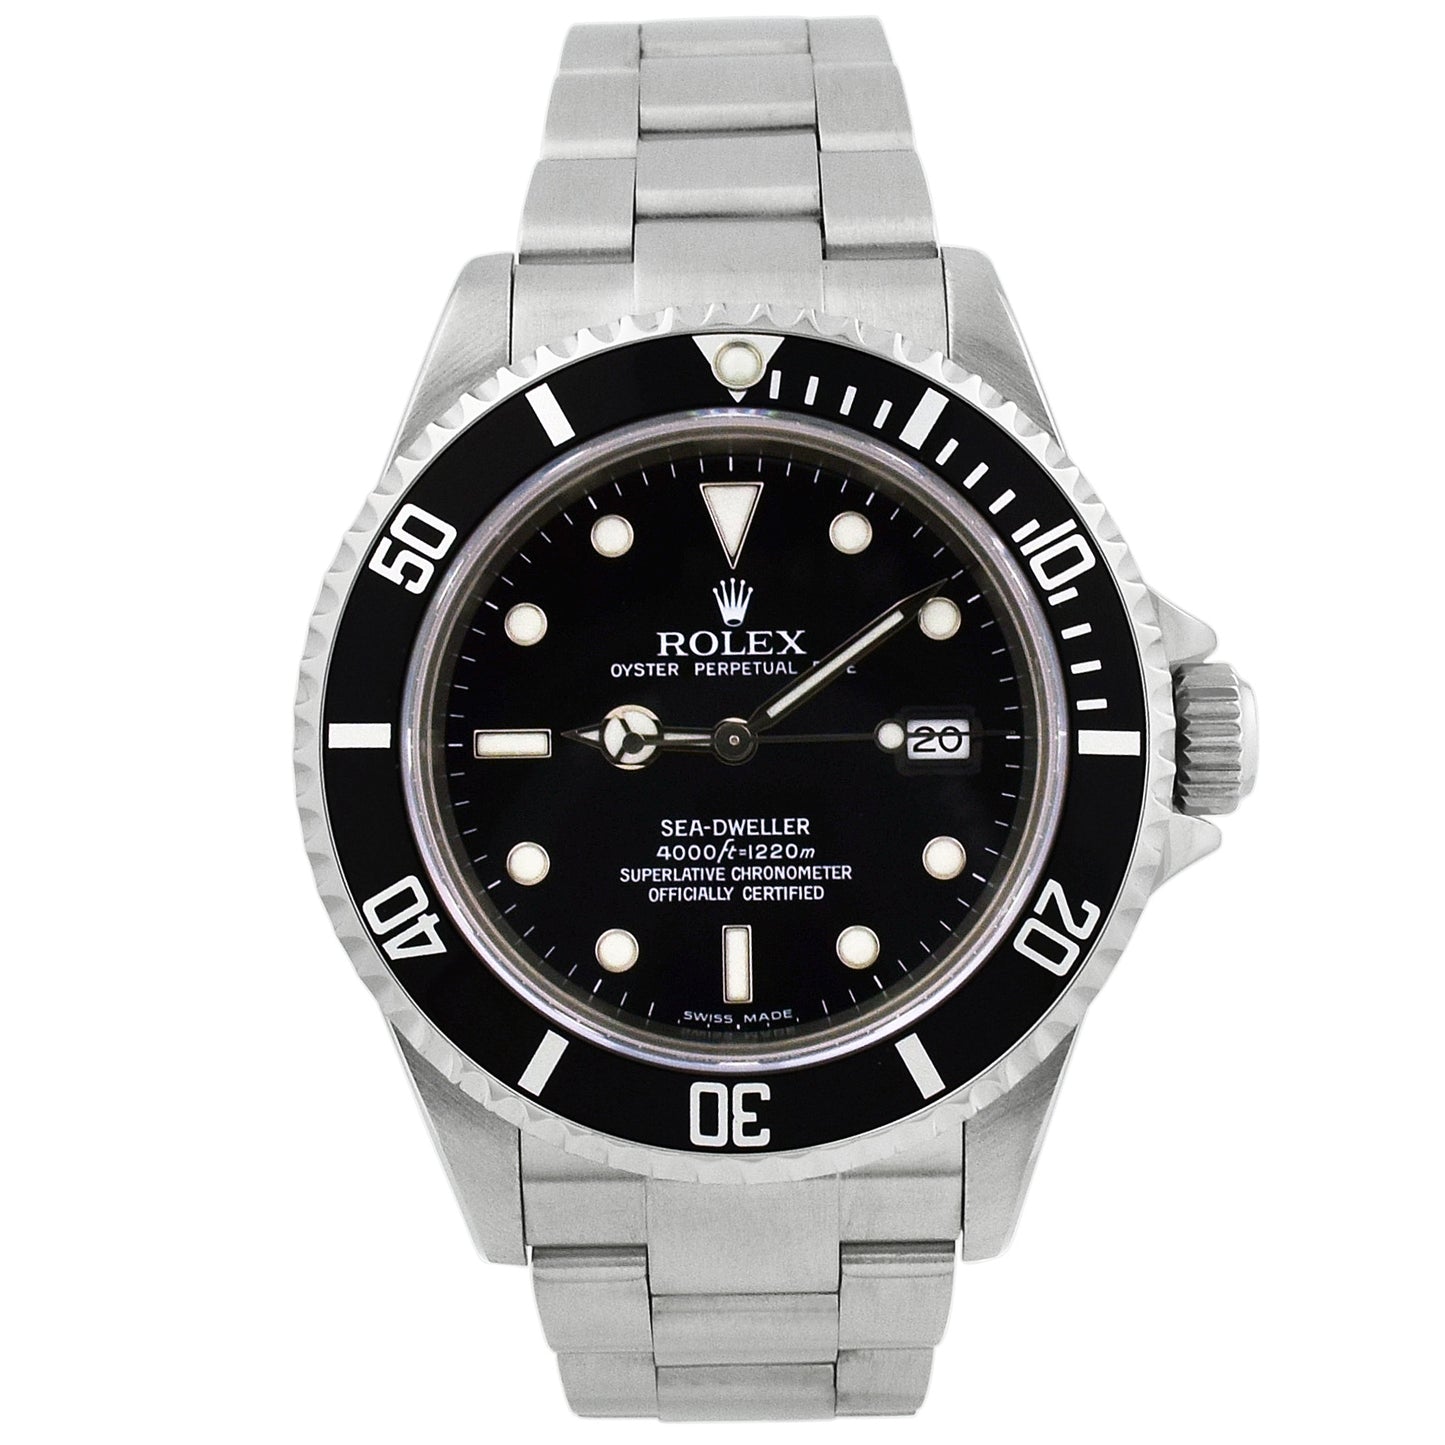 Rolex Sea Dweller 4000 Stainless Steel 40mm Black Dot Dial Watch Reference #: 16600